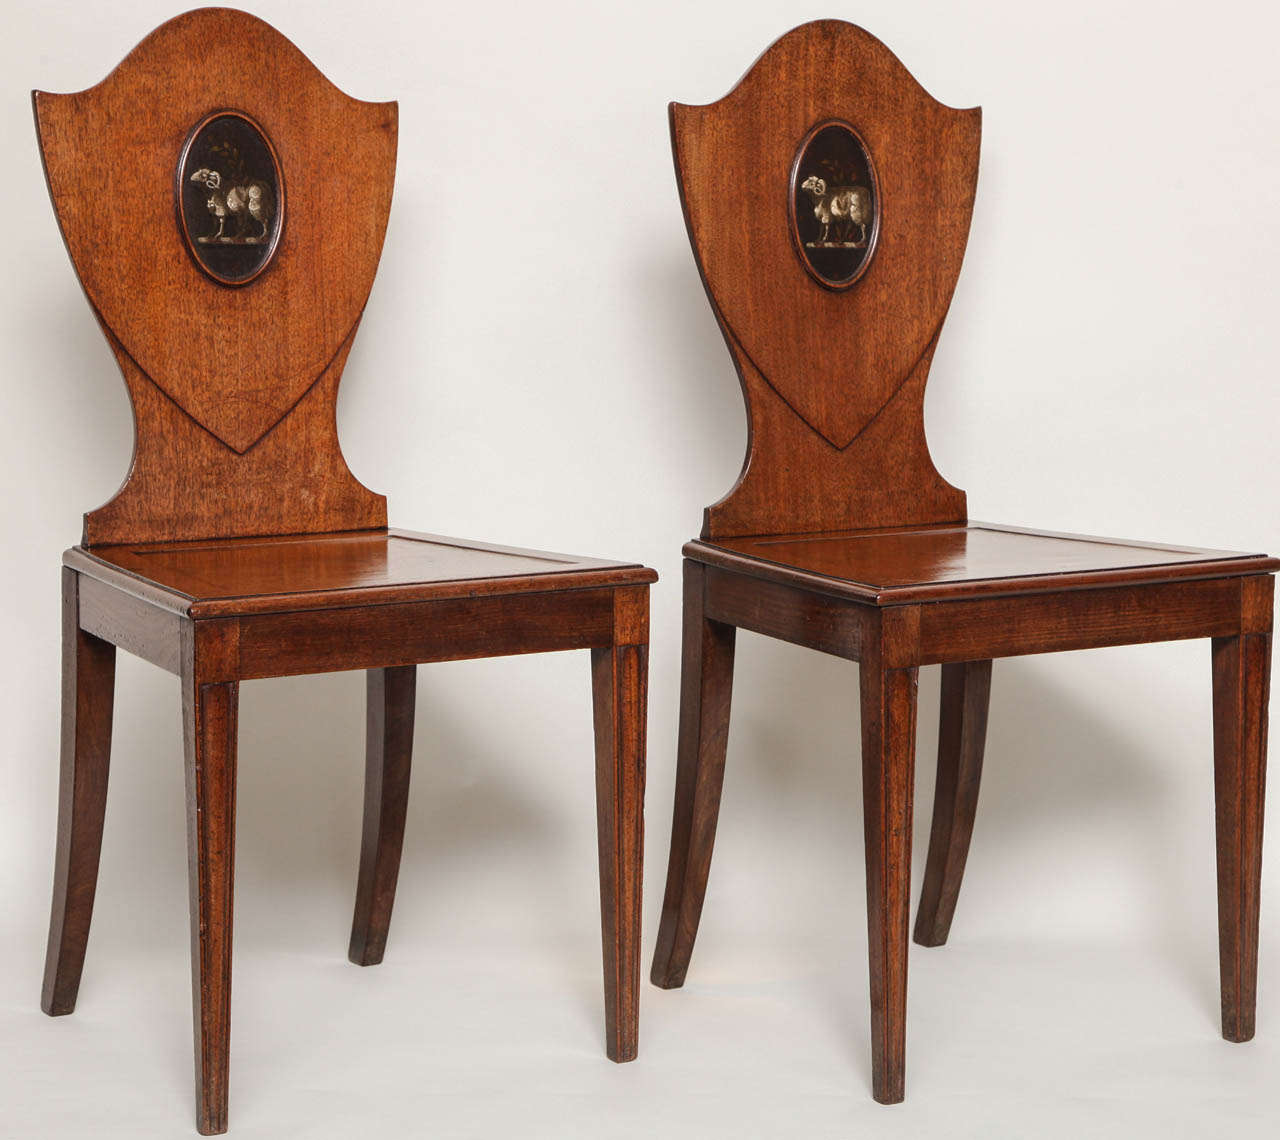 Fine pair of George III mahogany hall chairs, attributed to Gillows, the shield backs with oval crests having heraldic painted rams with laurel branches, the seats with square recess and molded edge, standing on molded tapered legs, both with good